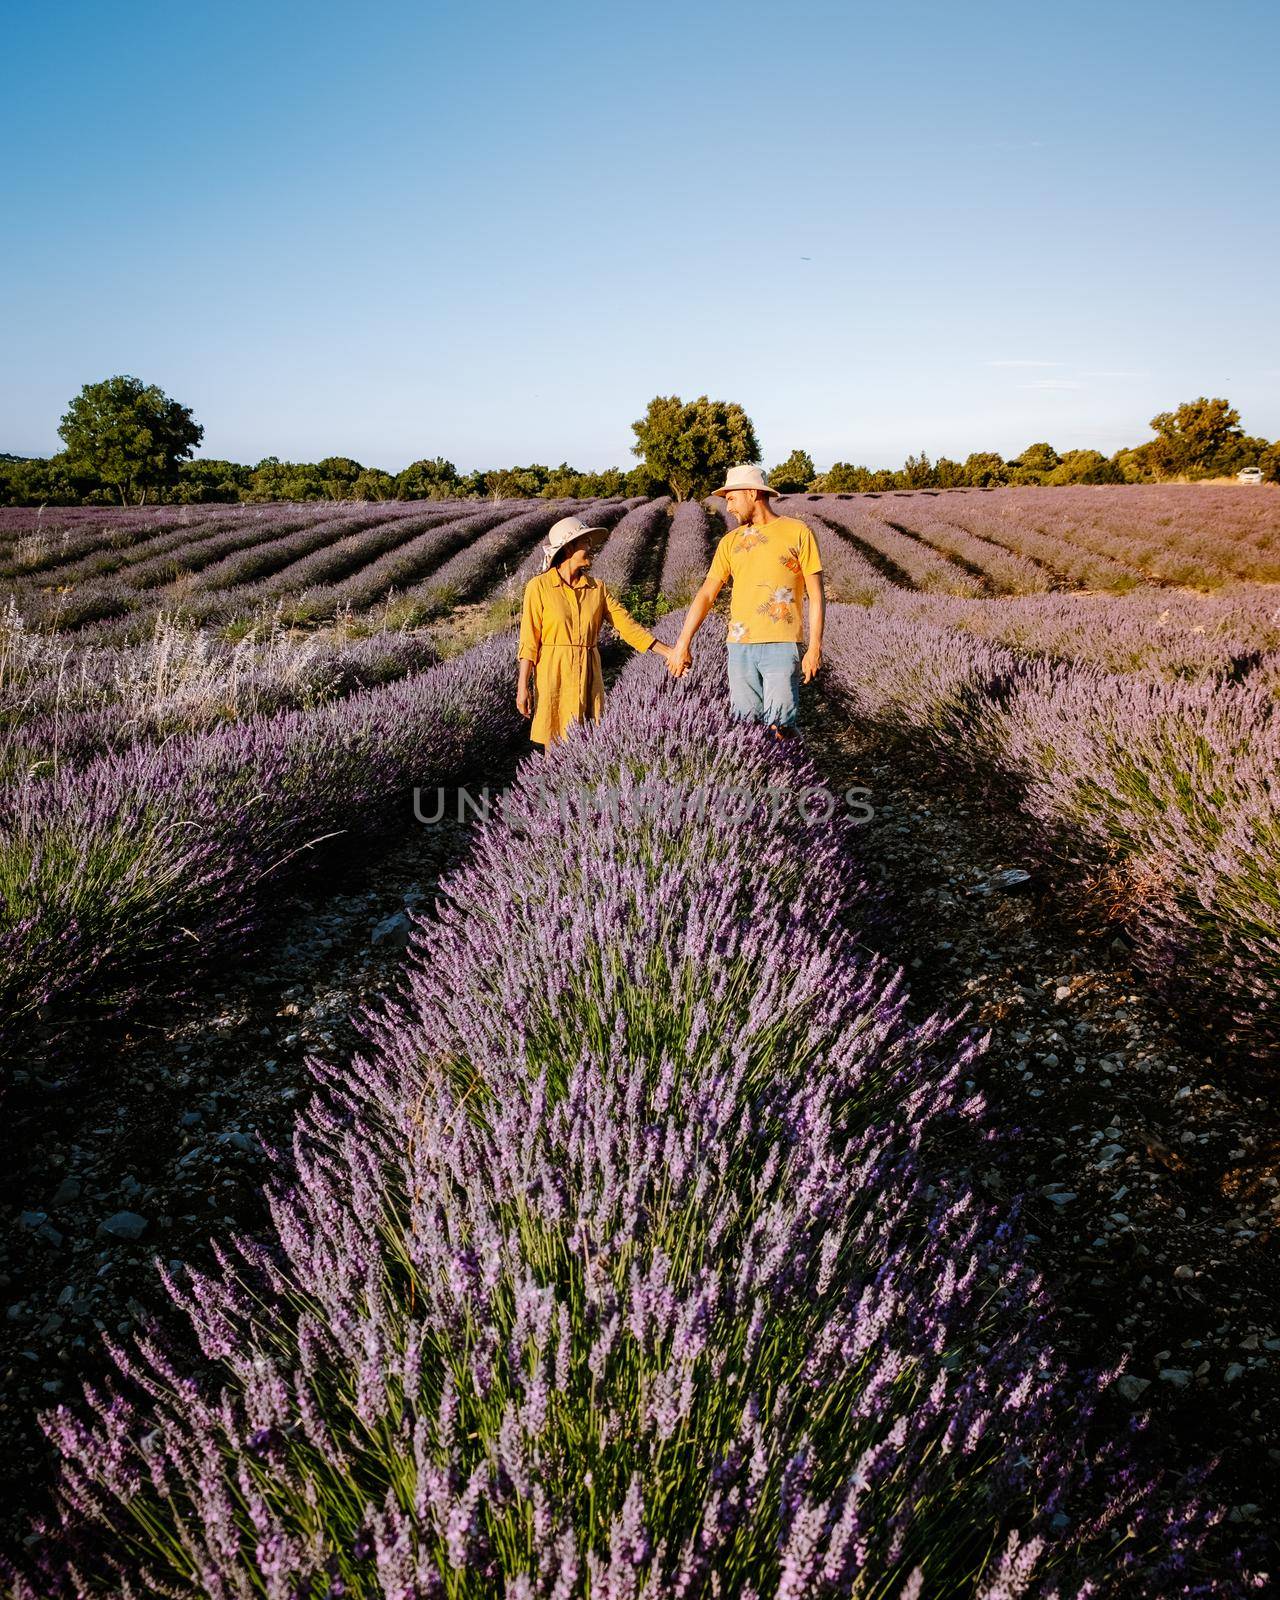 Ardeche lavender fields in the south of France during sunset, Lavender fields in Ardeche in southeast France, couple men and woman watching sunset in lavender fields in the south of France by fokkebok